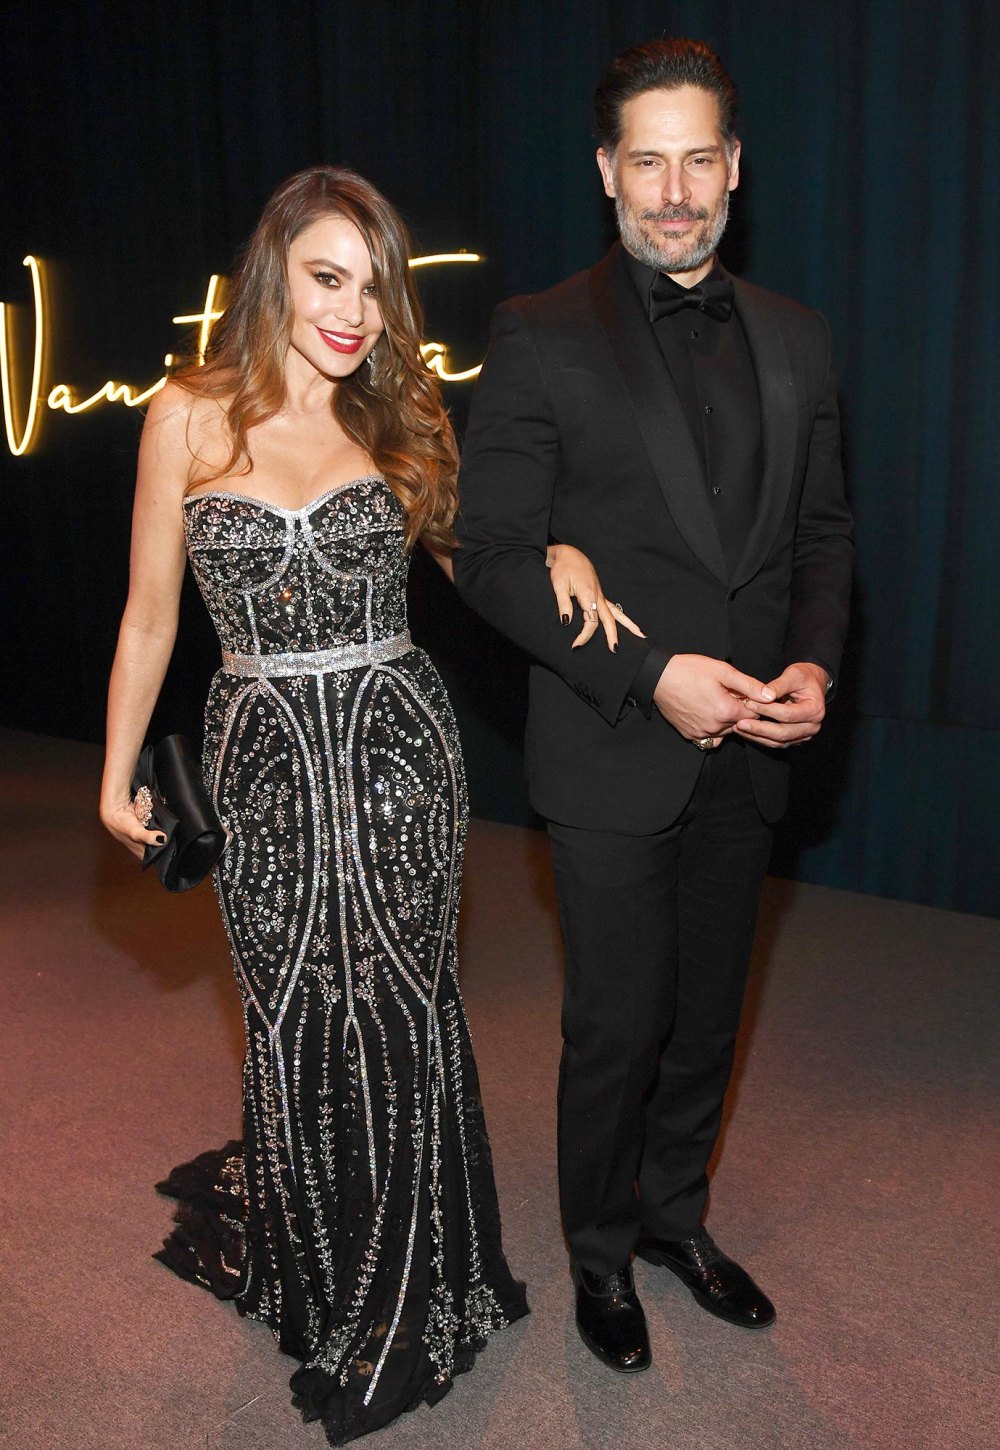 Joe Manganiello and Caitlin OConnor Make Red Carpet Debut 3 Months After Sparking Romance Rumors